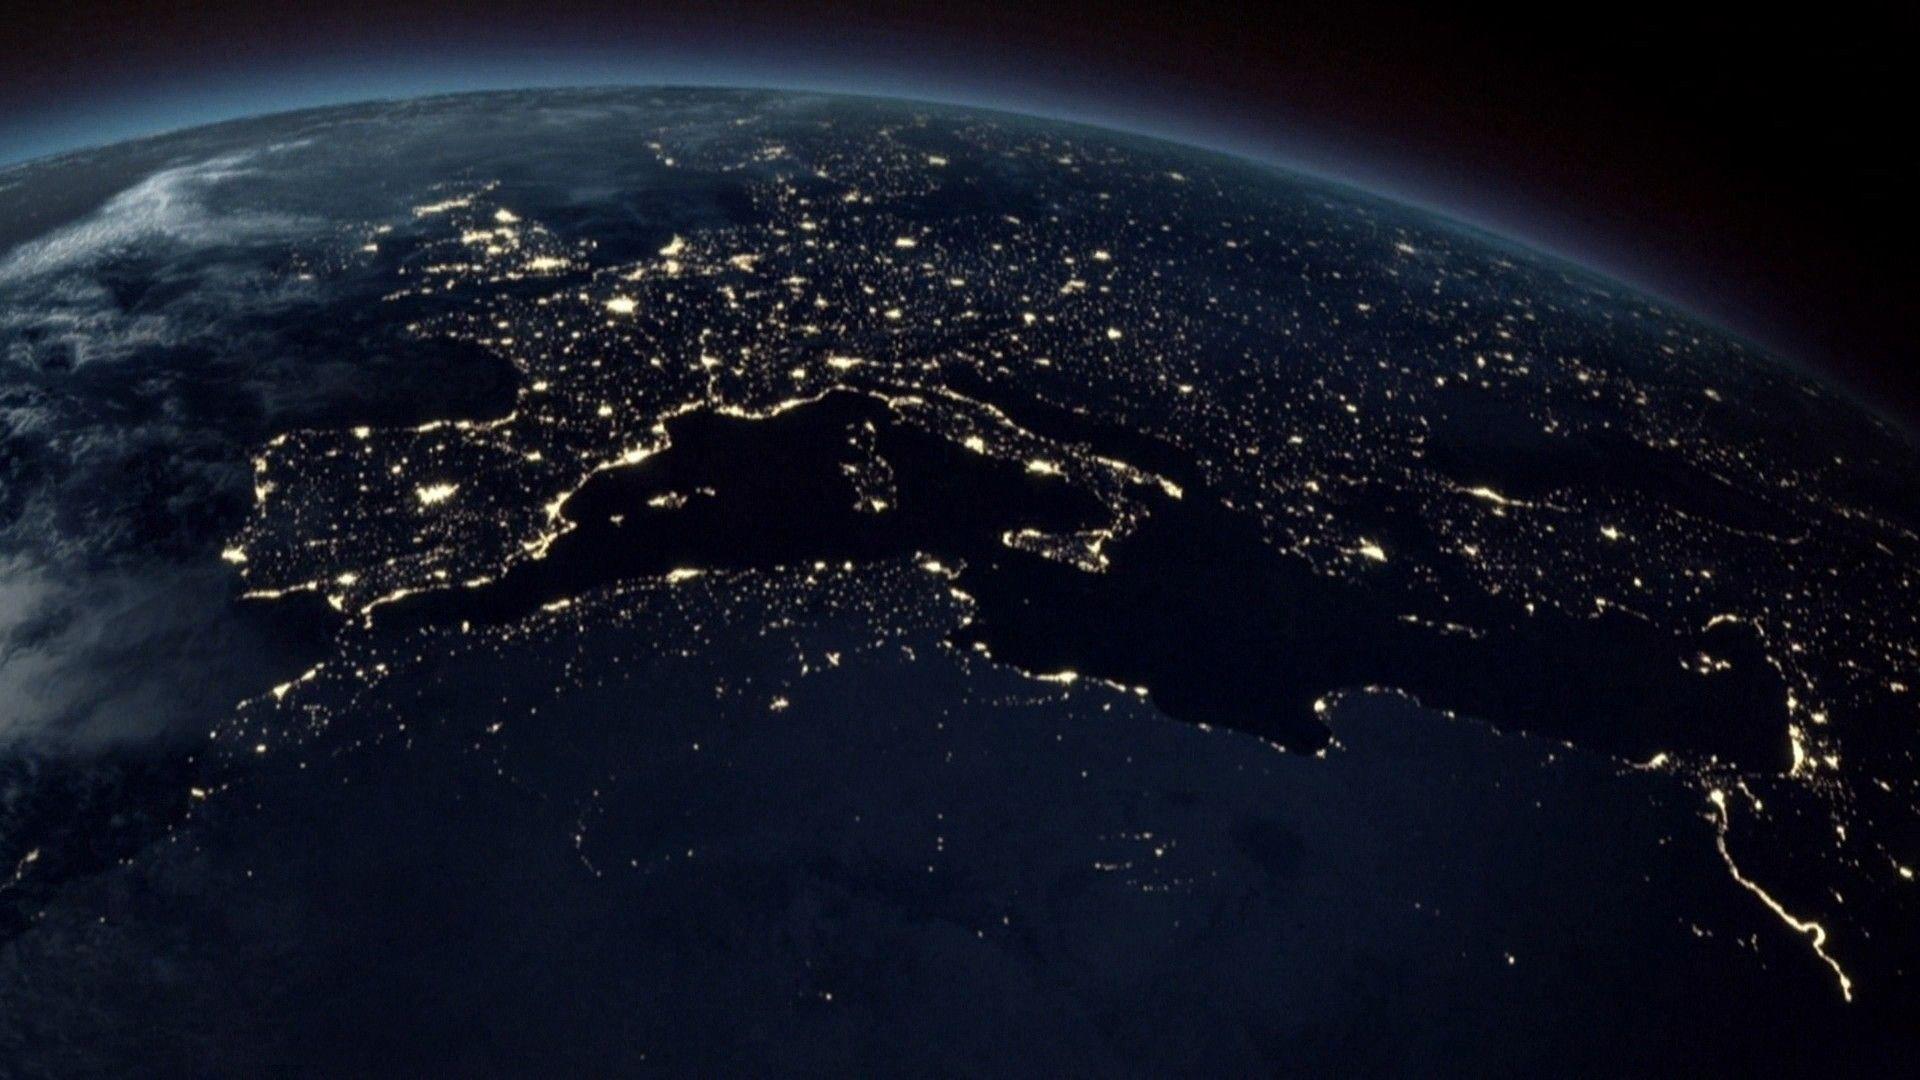 HD Wallpaper of Earth At Night From Space. Related to Geomatics